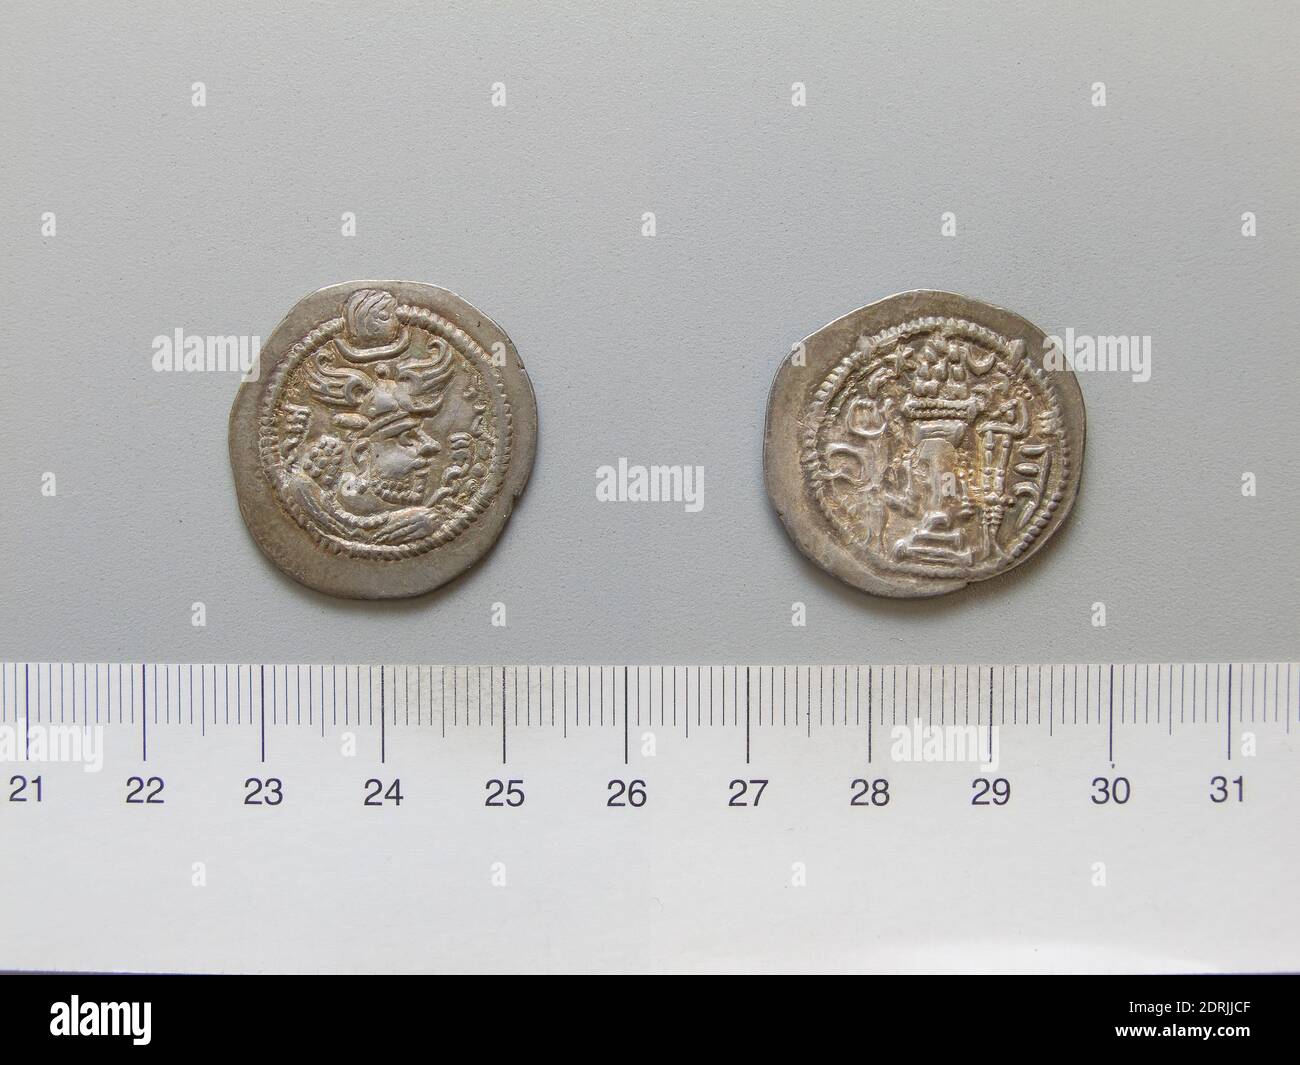 Ruler: Peroz I, 457/459-484 A.D.Mint: Persis, Coin of Peroz I from Persis, 457–84, Silver, 4.14 g, 3:00, 26 mm, Made in Persis, Greek, 5th century A.D., Numismatics Stock Photo